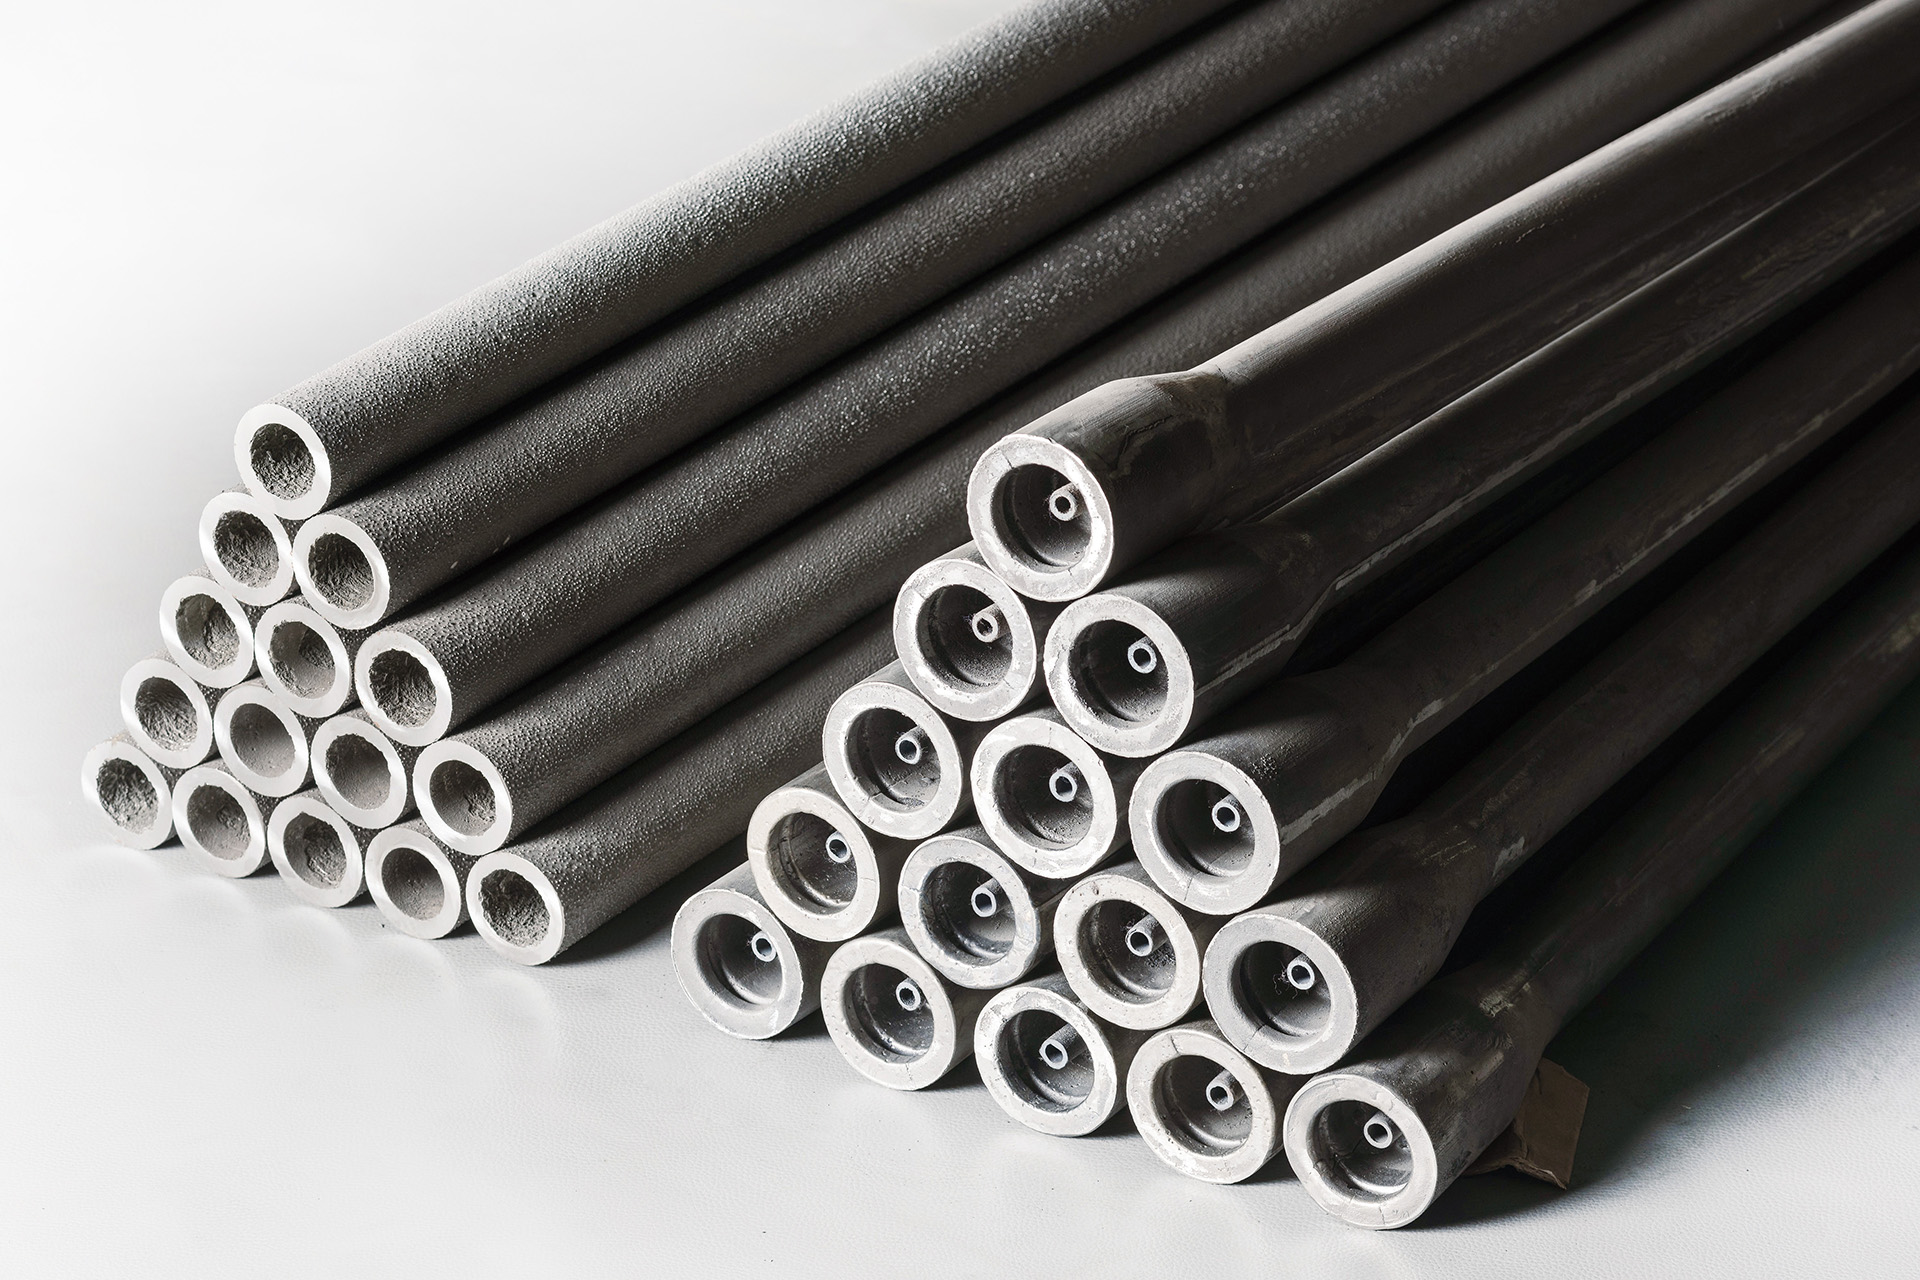 High Silicon Cast Iron Stick Anodes